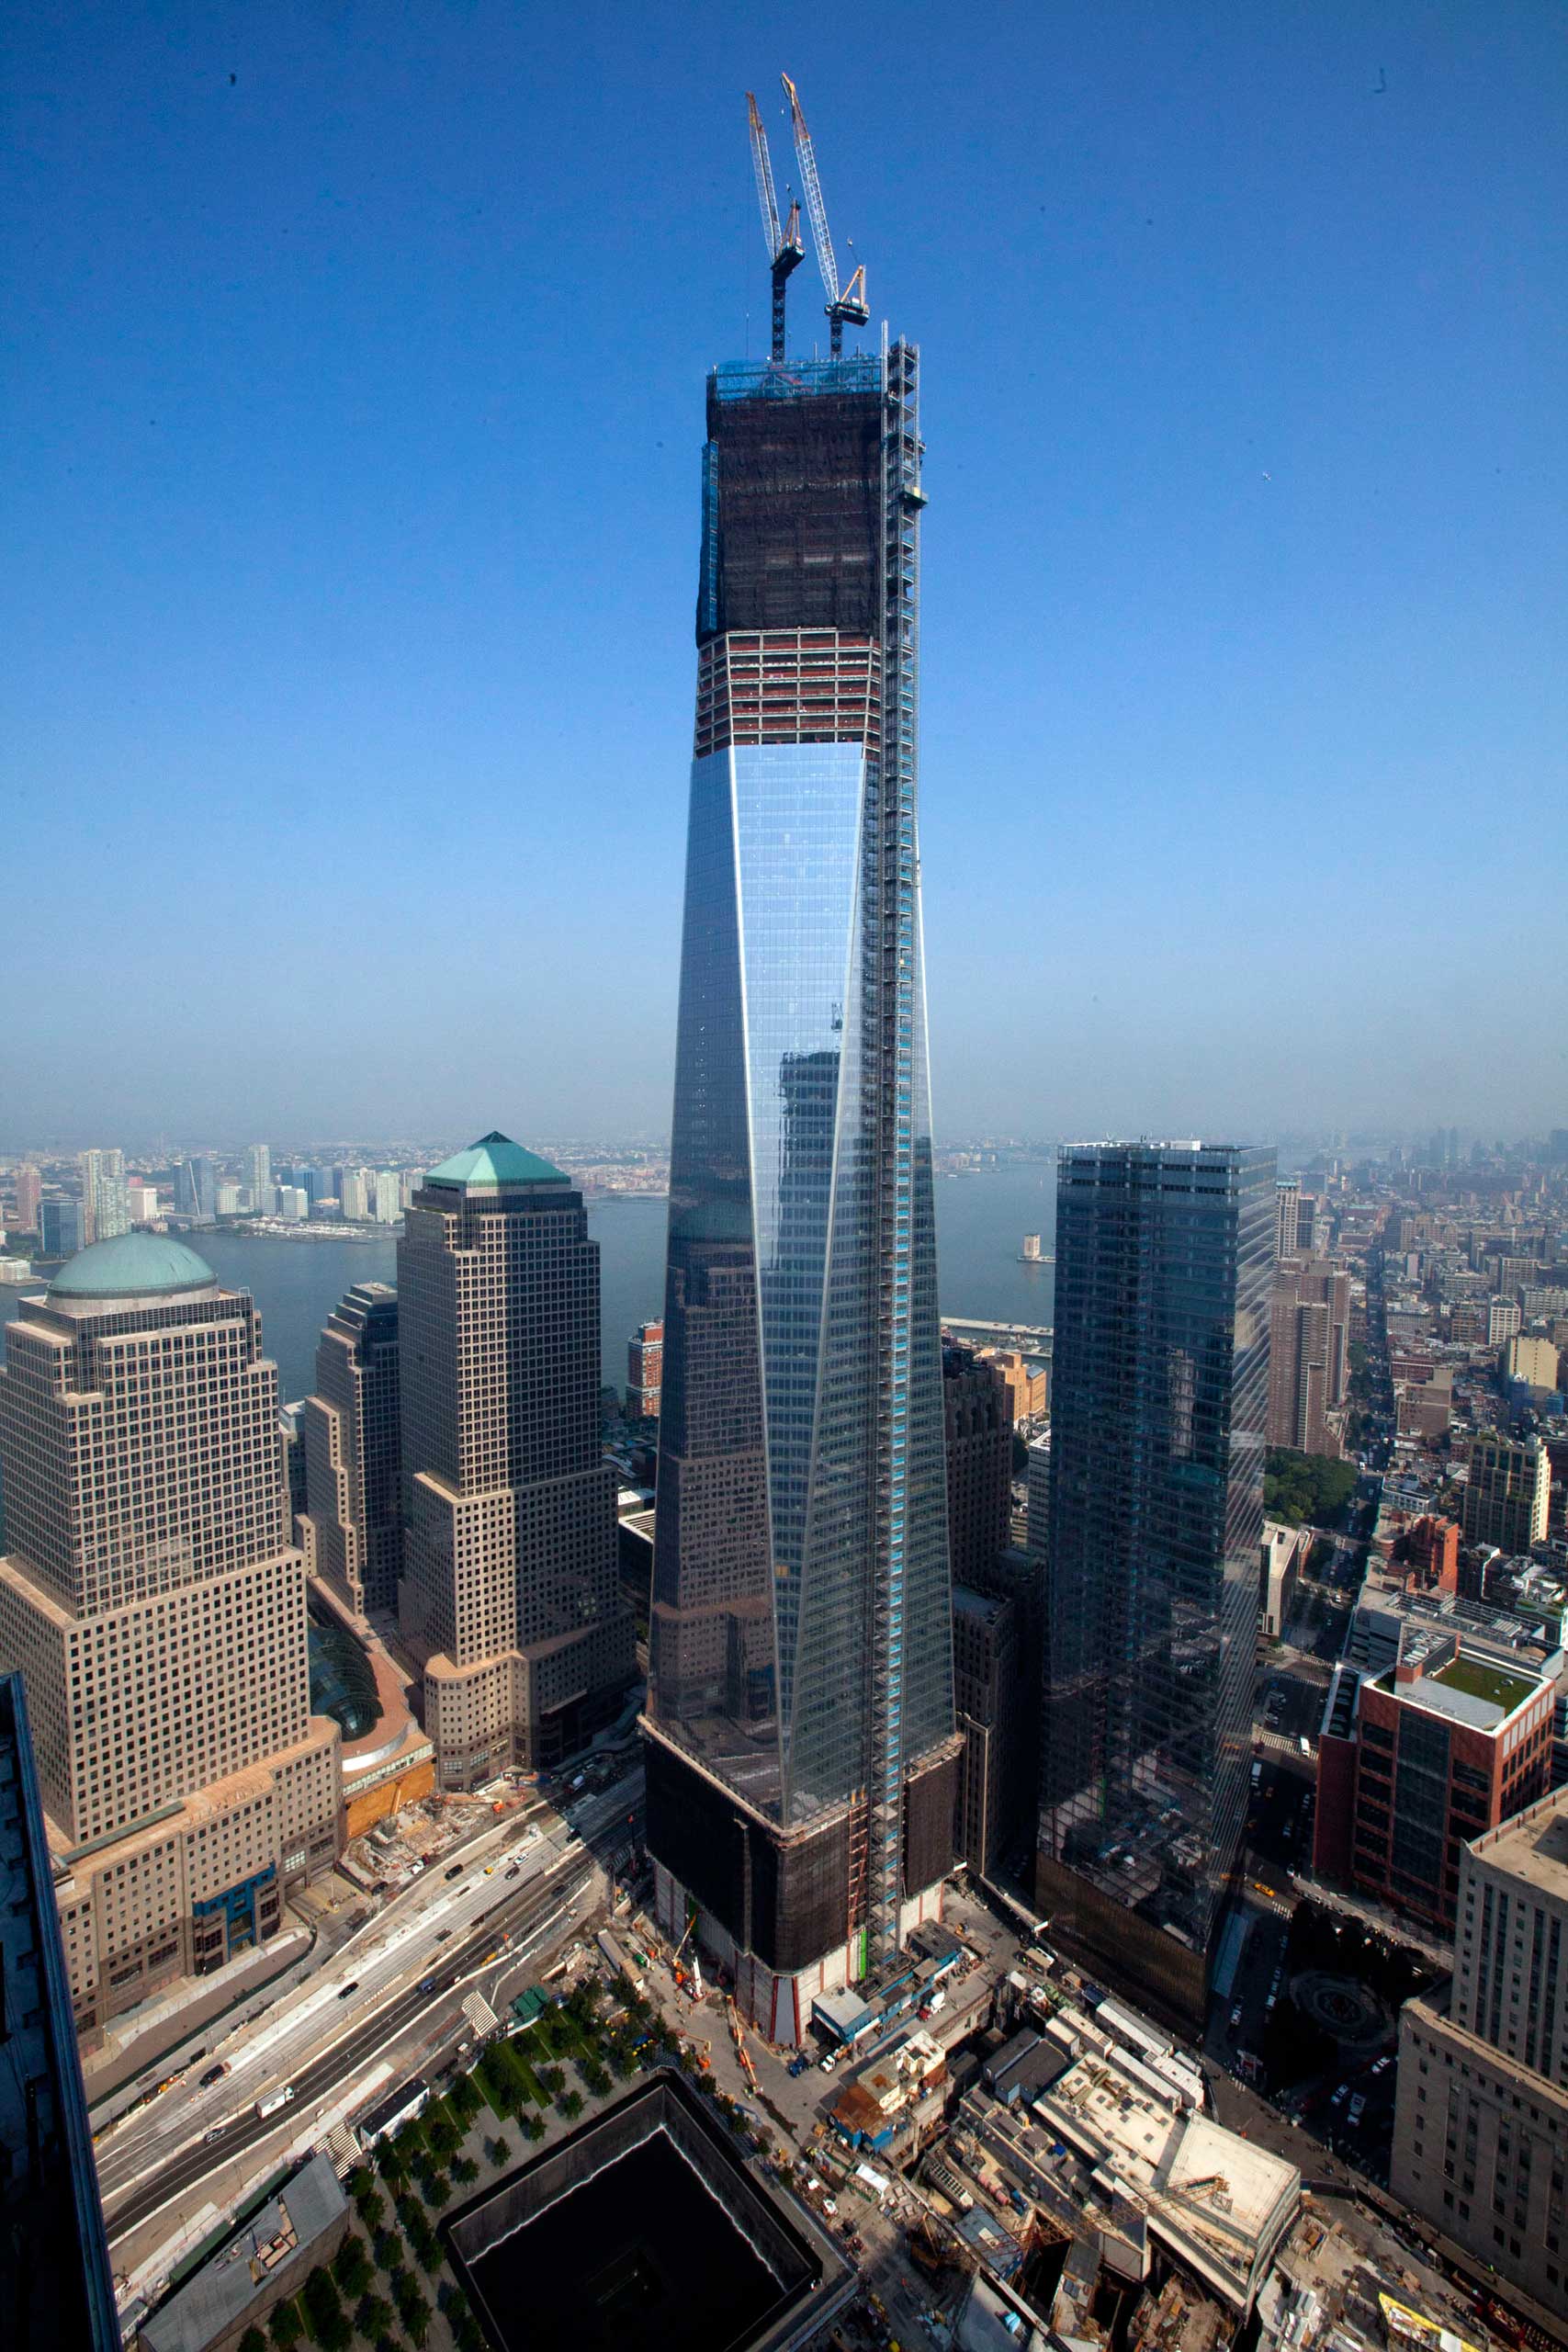 The One World Trade Center building is seen from the 60th floor of 4 World Trade Center in New York on Sept. 7, 2012.